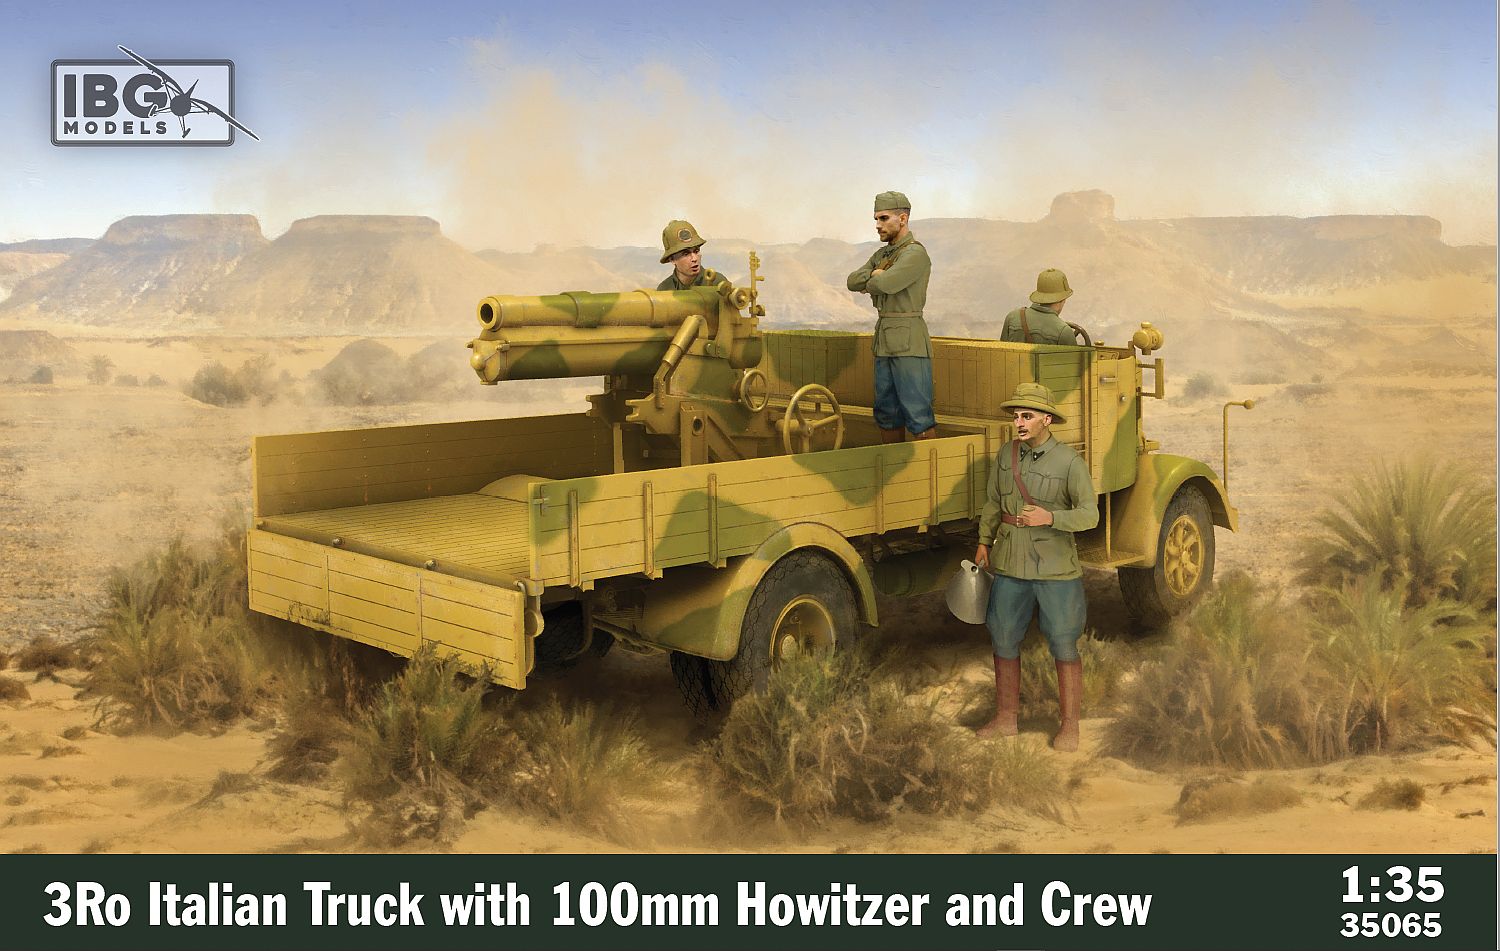 WWII 3Ro Italian Truck with 100mm Howitzer and Crew